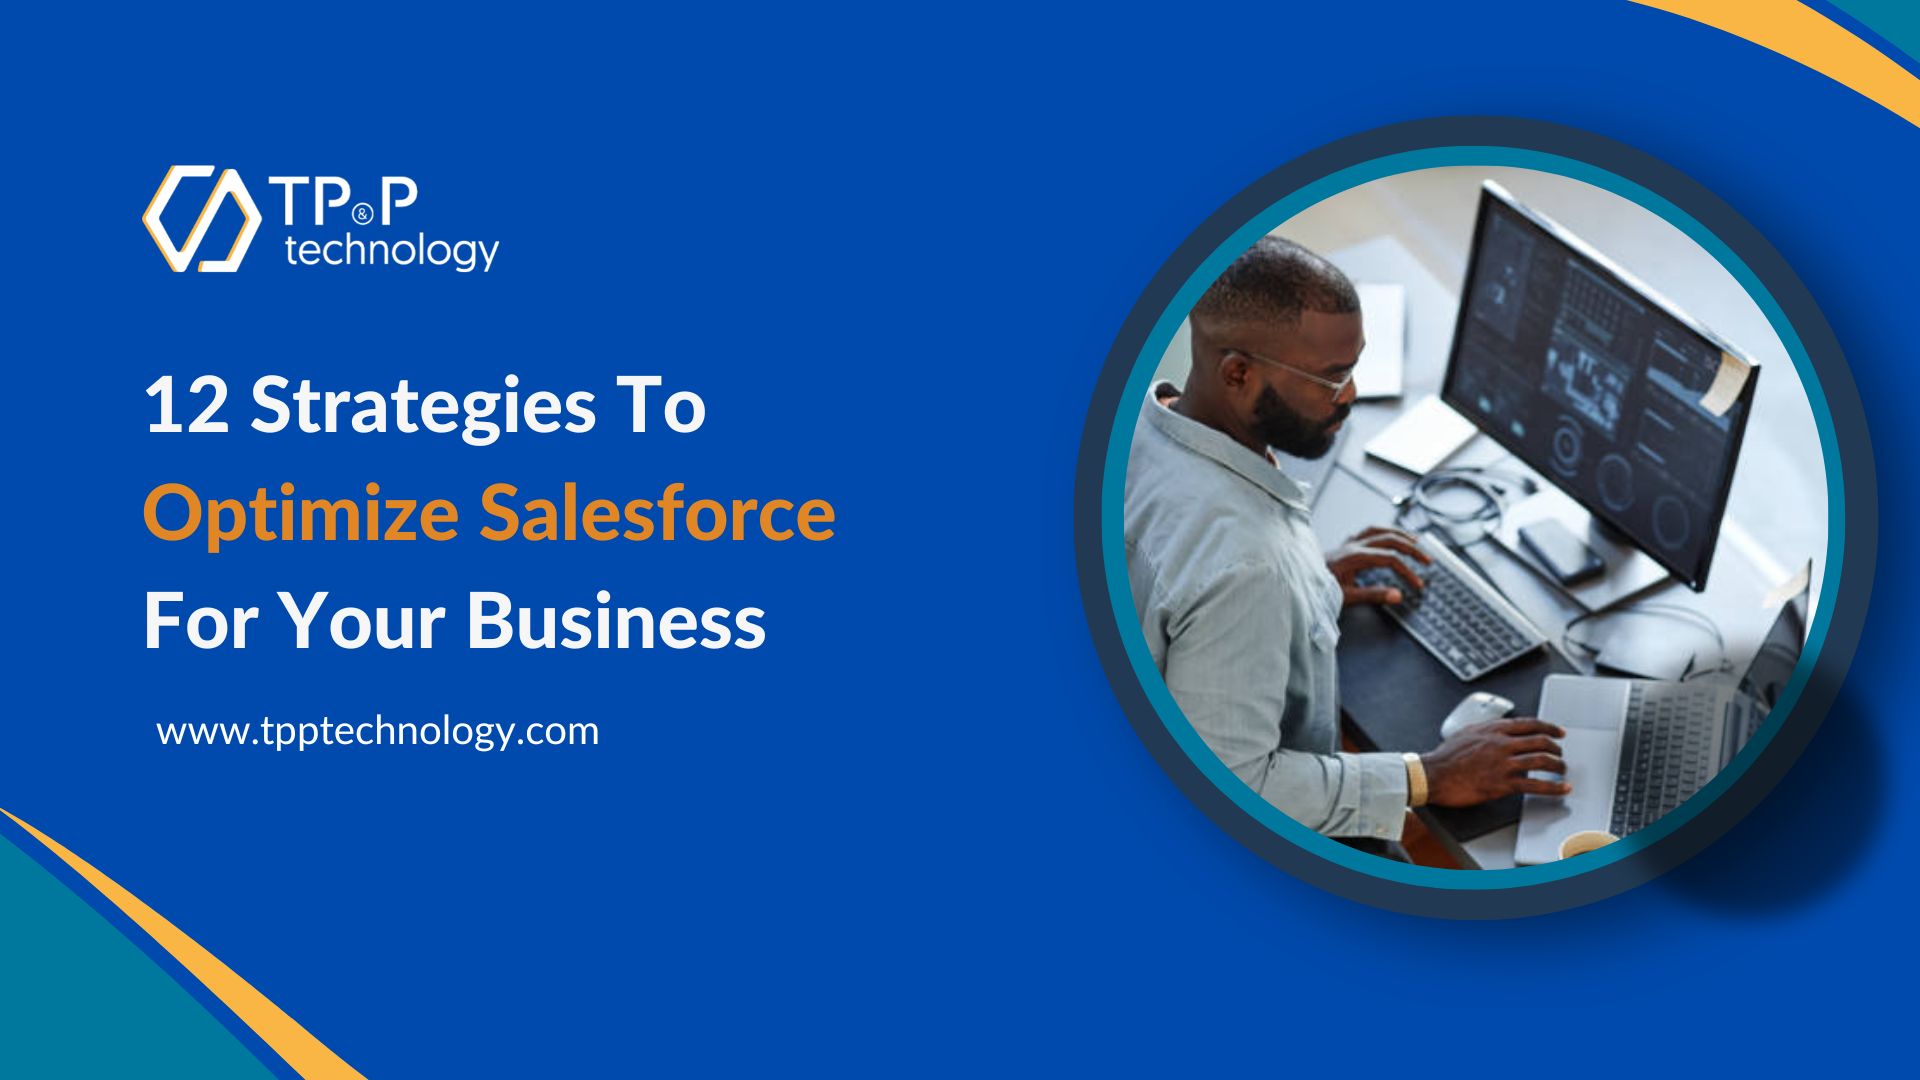 12 Strategies To Optimize Salesforce For Your Business